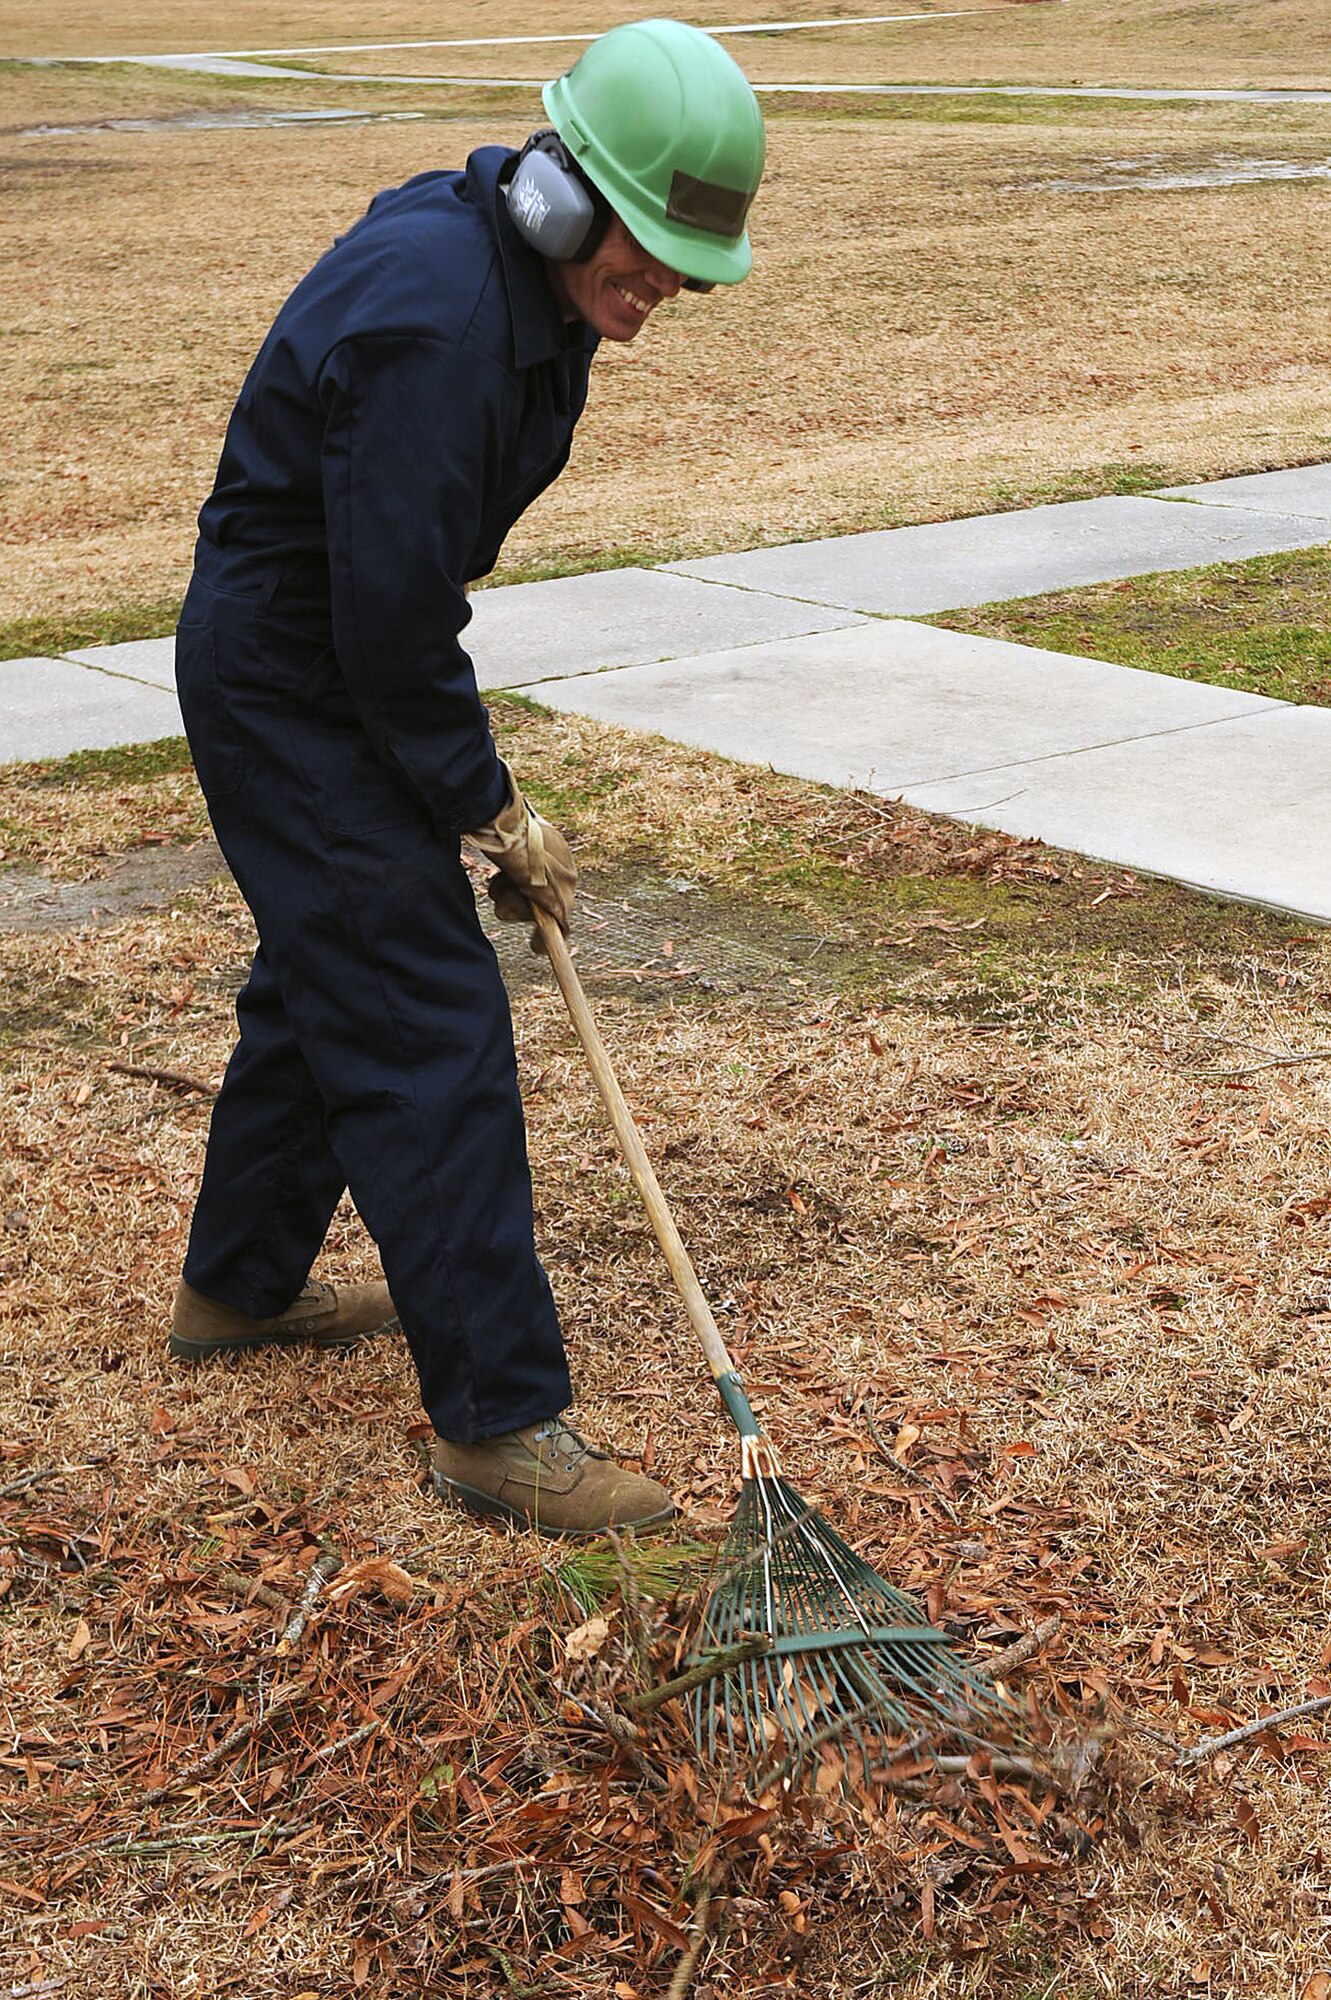 Tech Sgt. Douglas Gunn, 567th RED HORSE Squadron heavy equipment operator, rakes brush and leaves on Seymour Johnson Air Force Base, N.C., Feb. 24, 2010. After pushing large tree limbs through a wood chipper the remaining brush and leaves are raked together into smaller piles for disposal. Gunn hails from Greenville, N.C. (U.S. Air Force photo/Senior Airman Ciara Wymbs) 